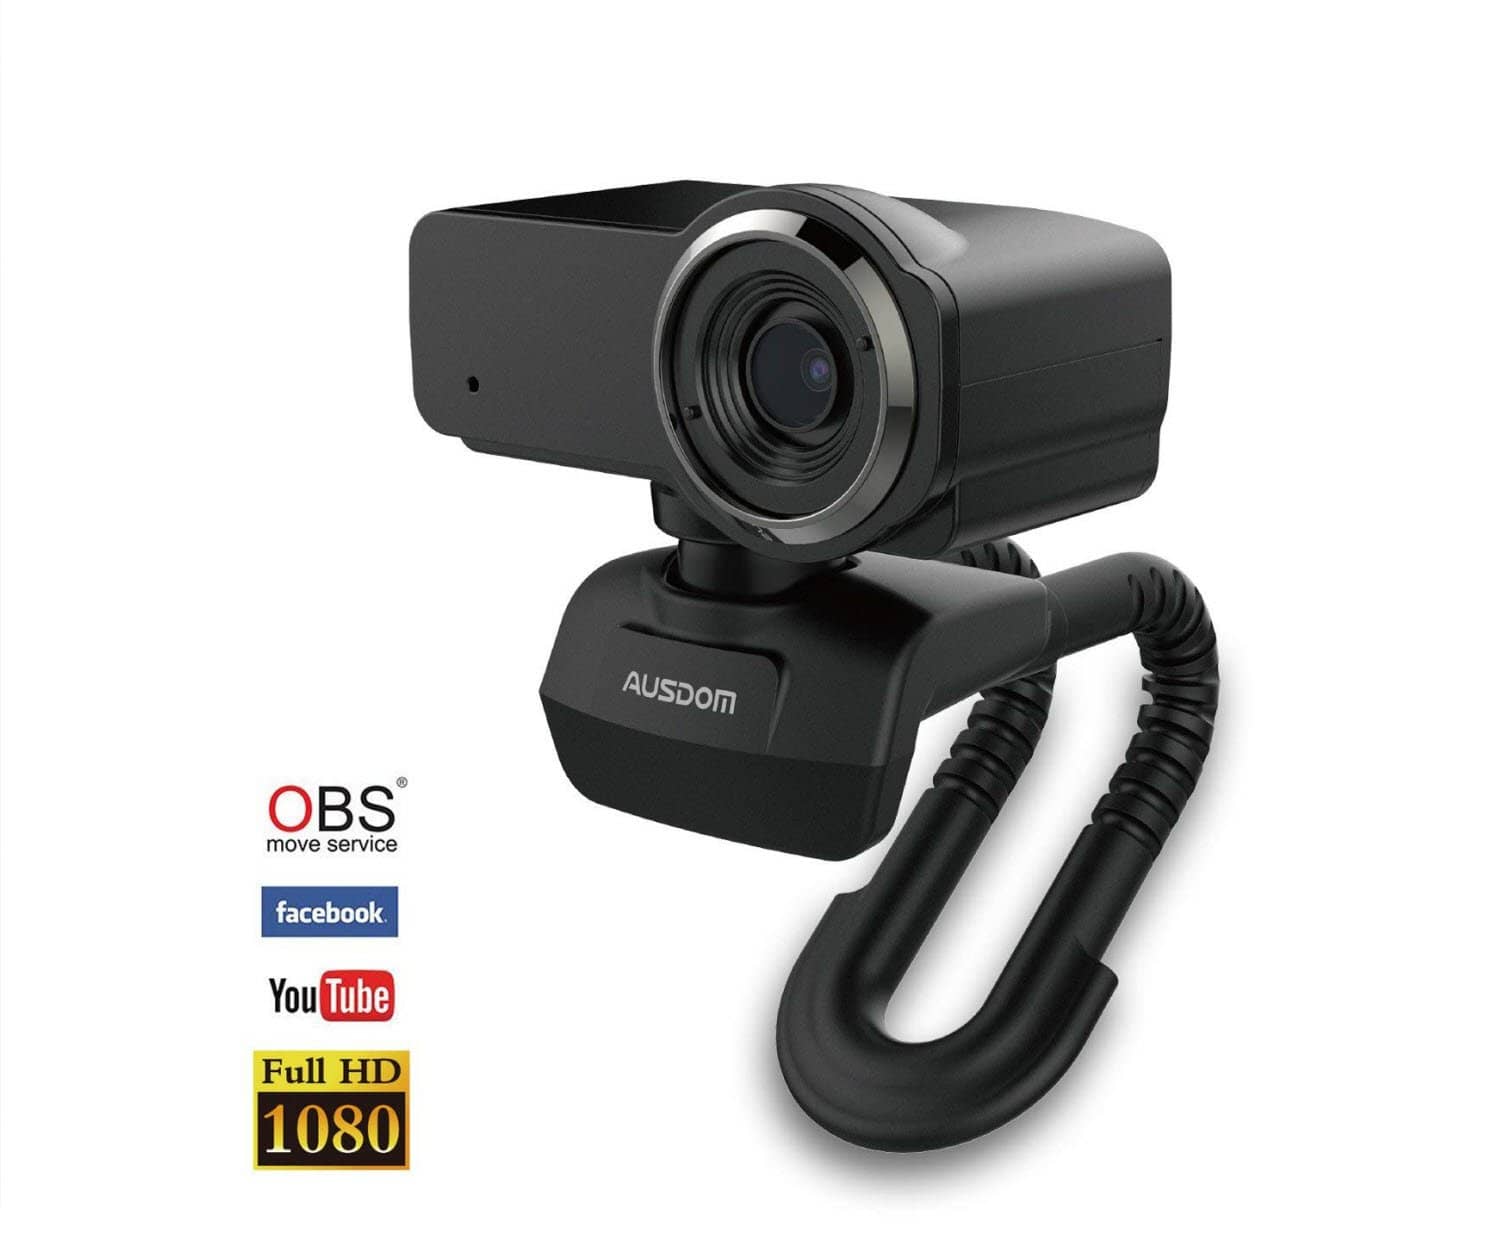 Ausdom Streaming Full HD 1080P Webcam with Microphone for Mac